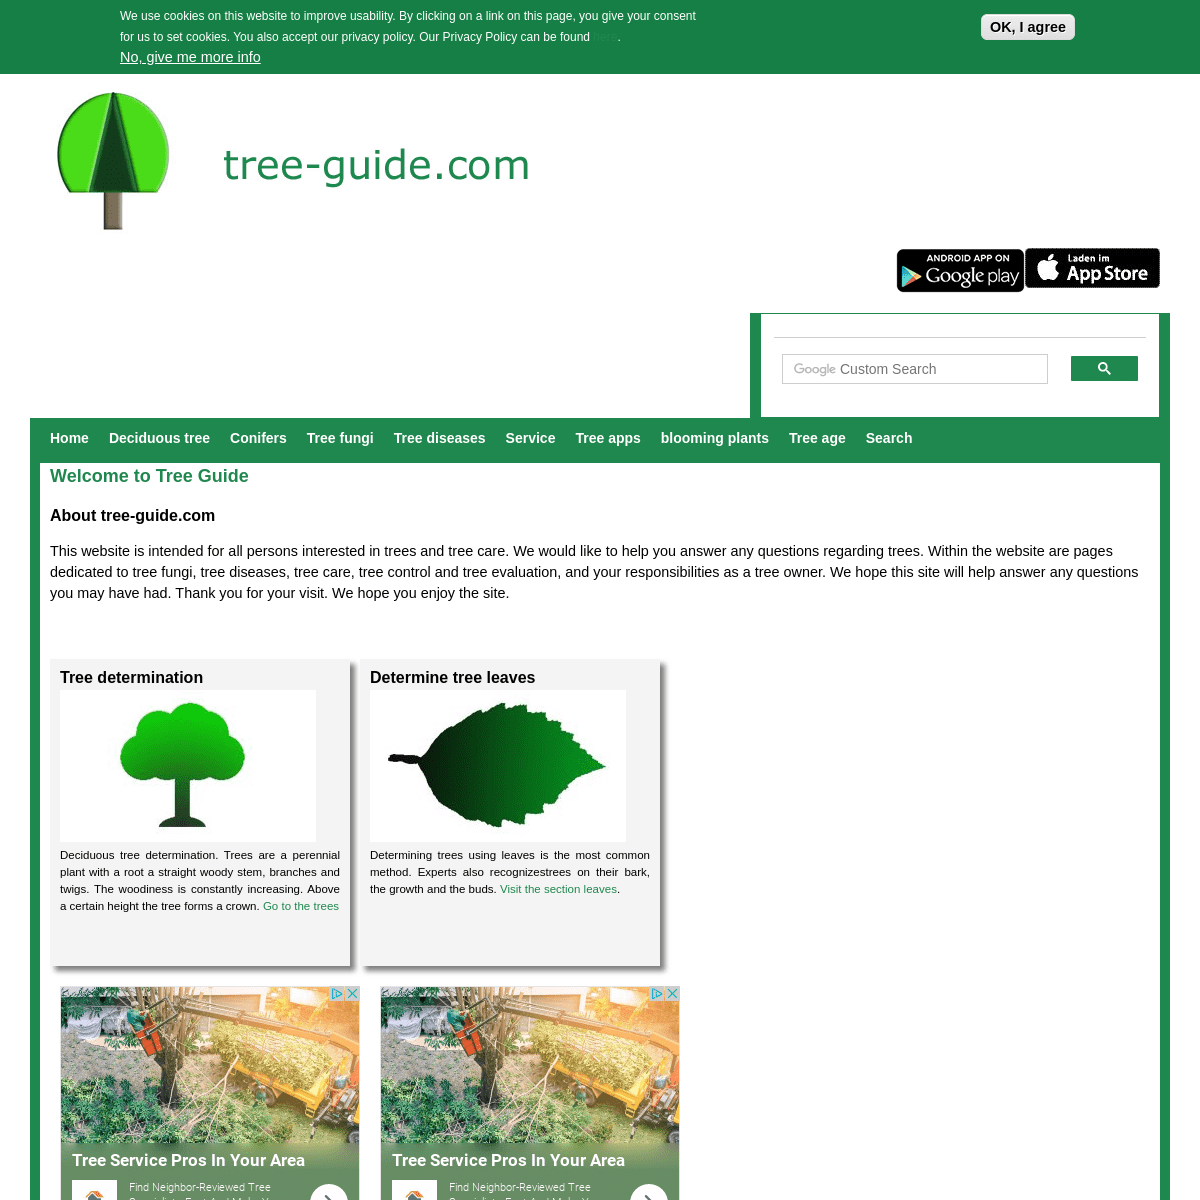 A complete backup of tree-guide.com